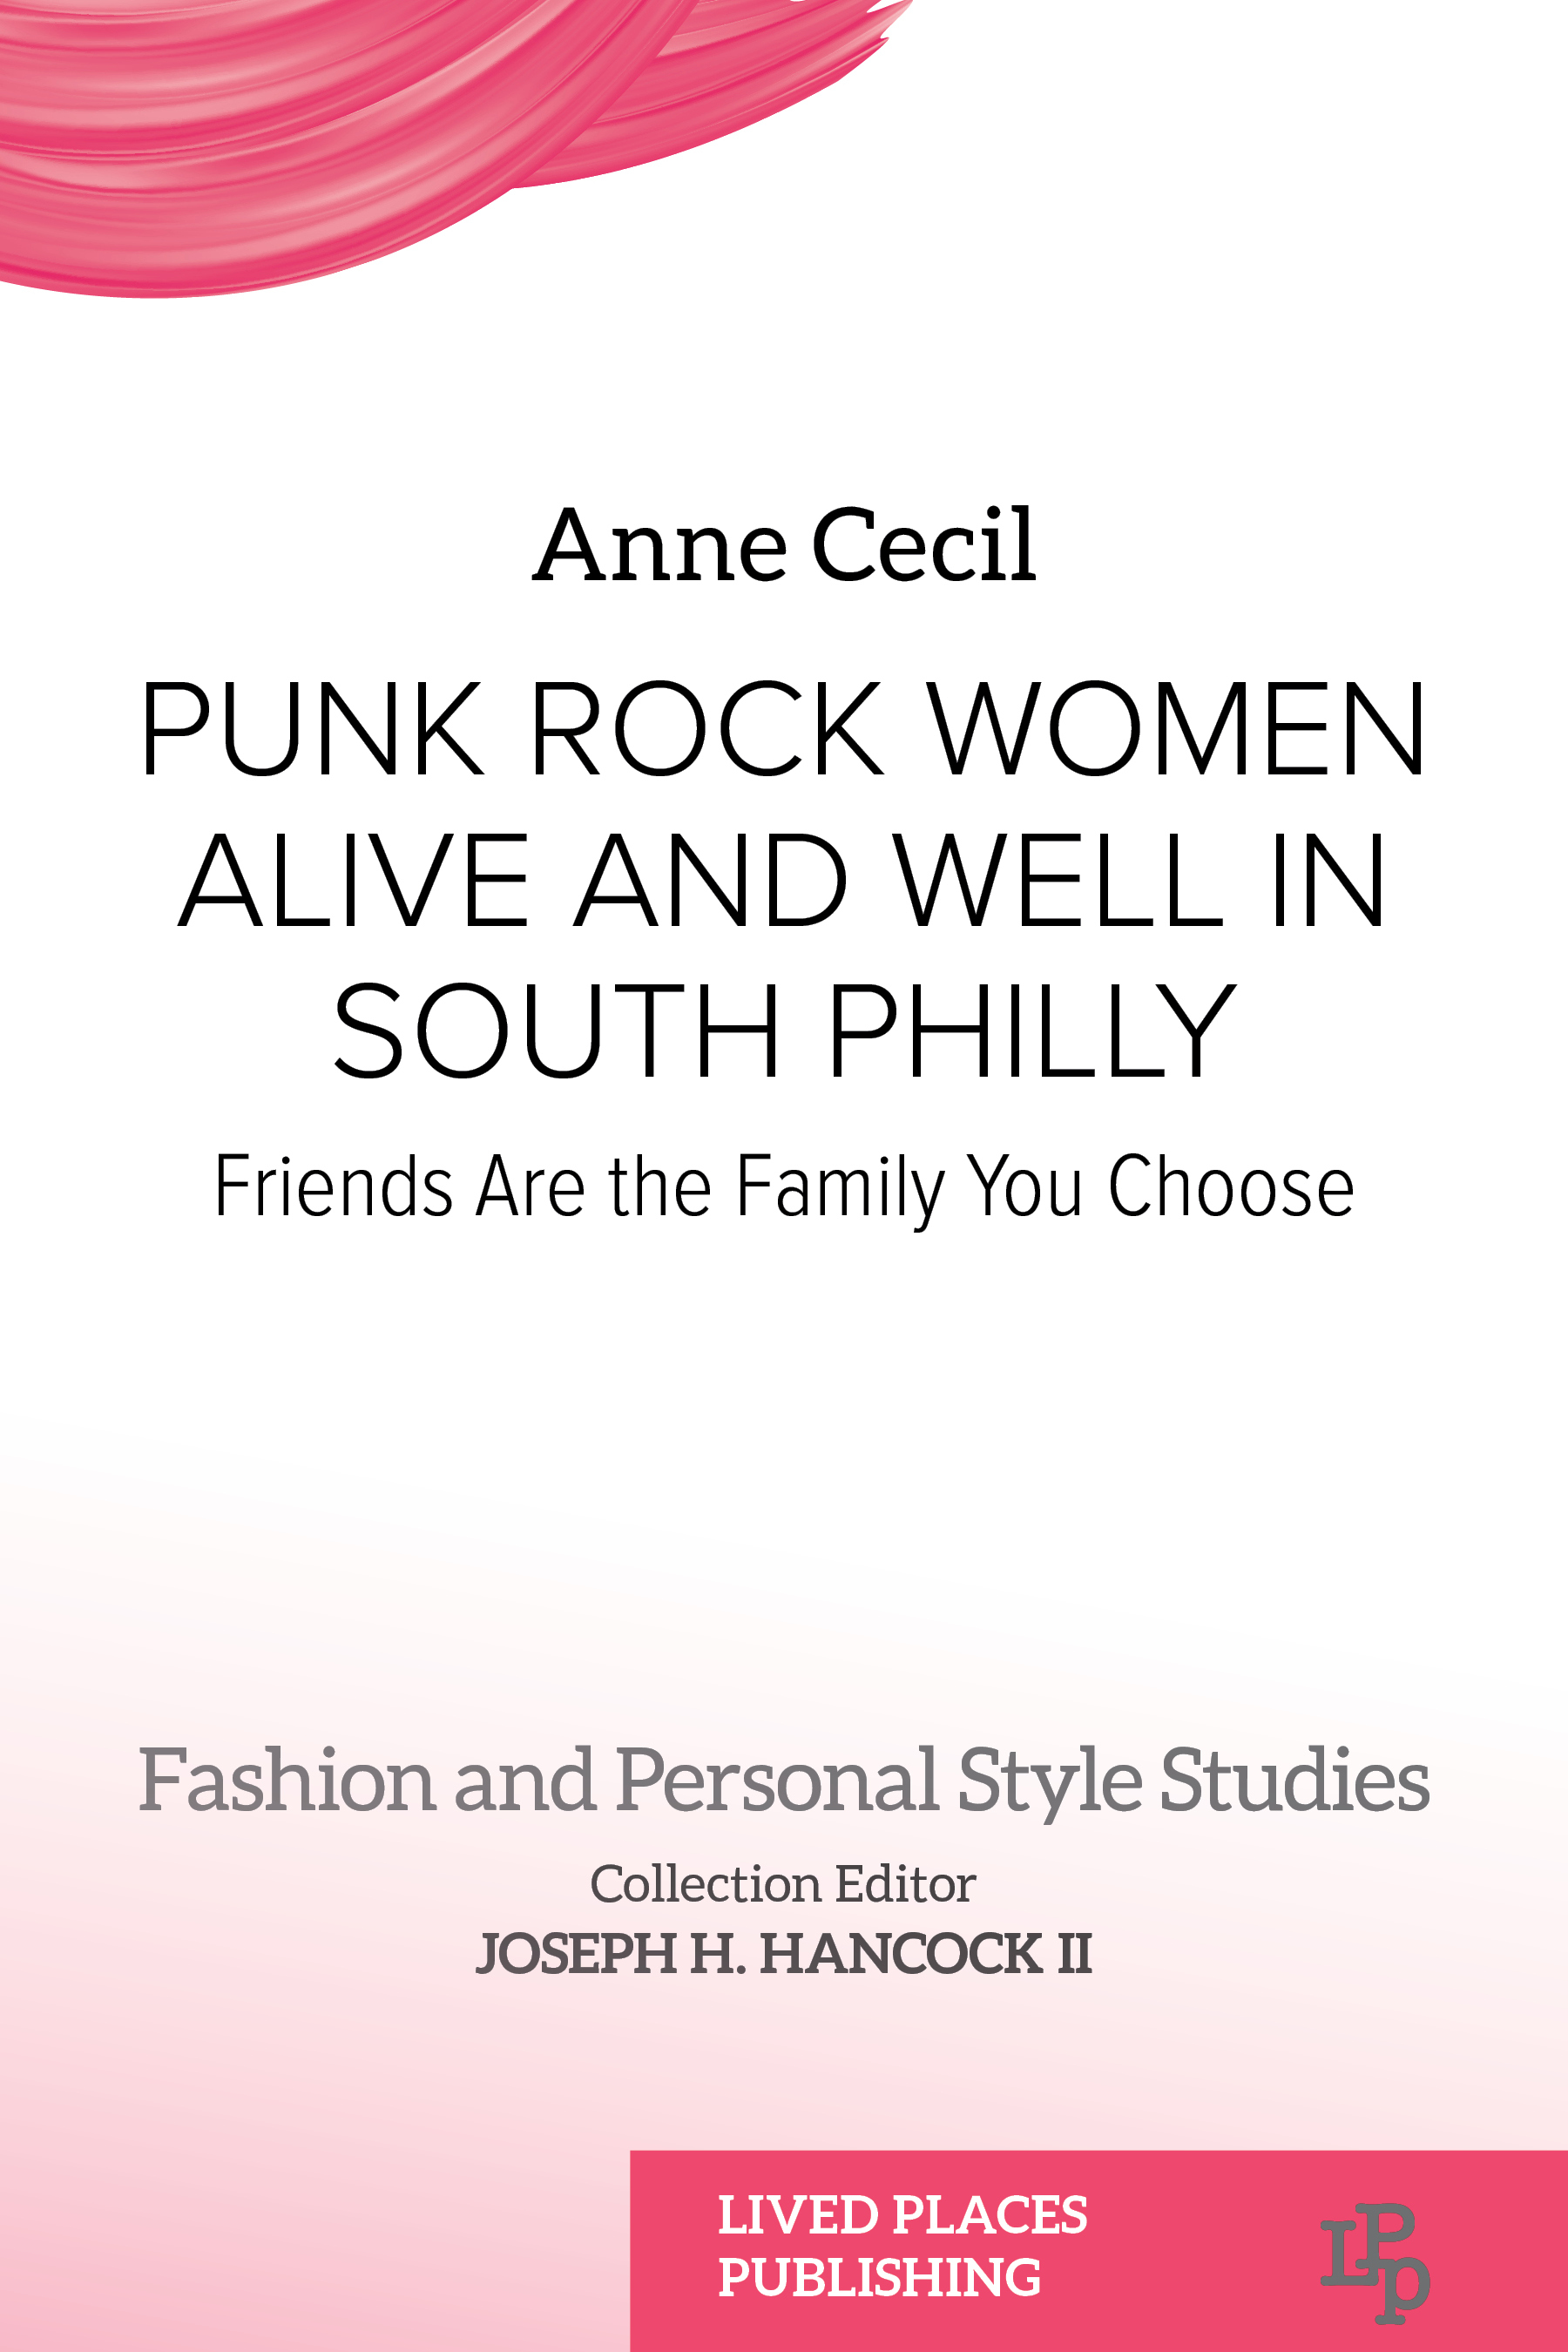 Punk Rock Women Alive and Well in South Philly